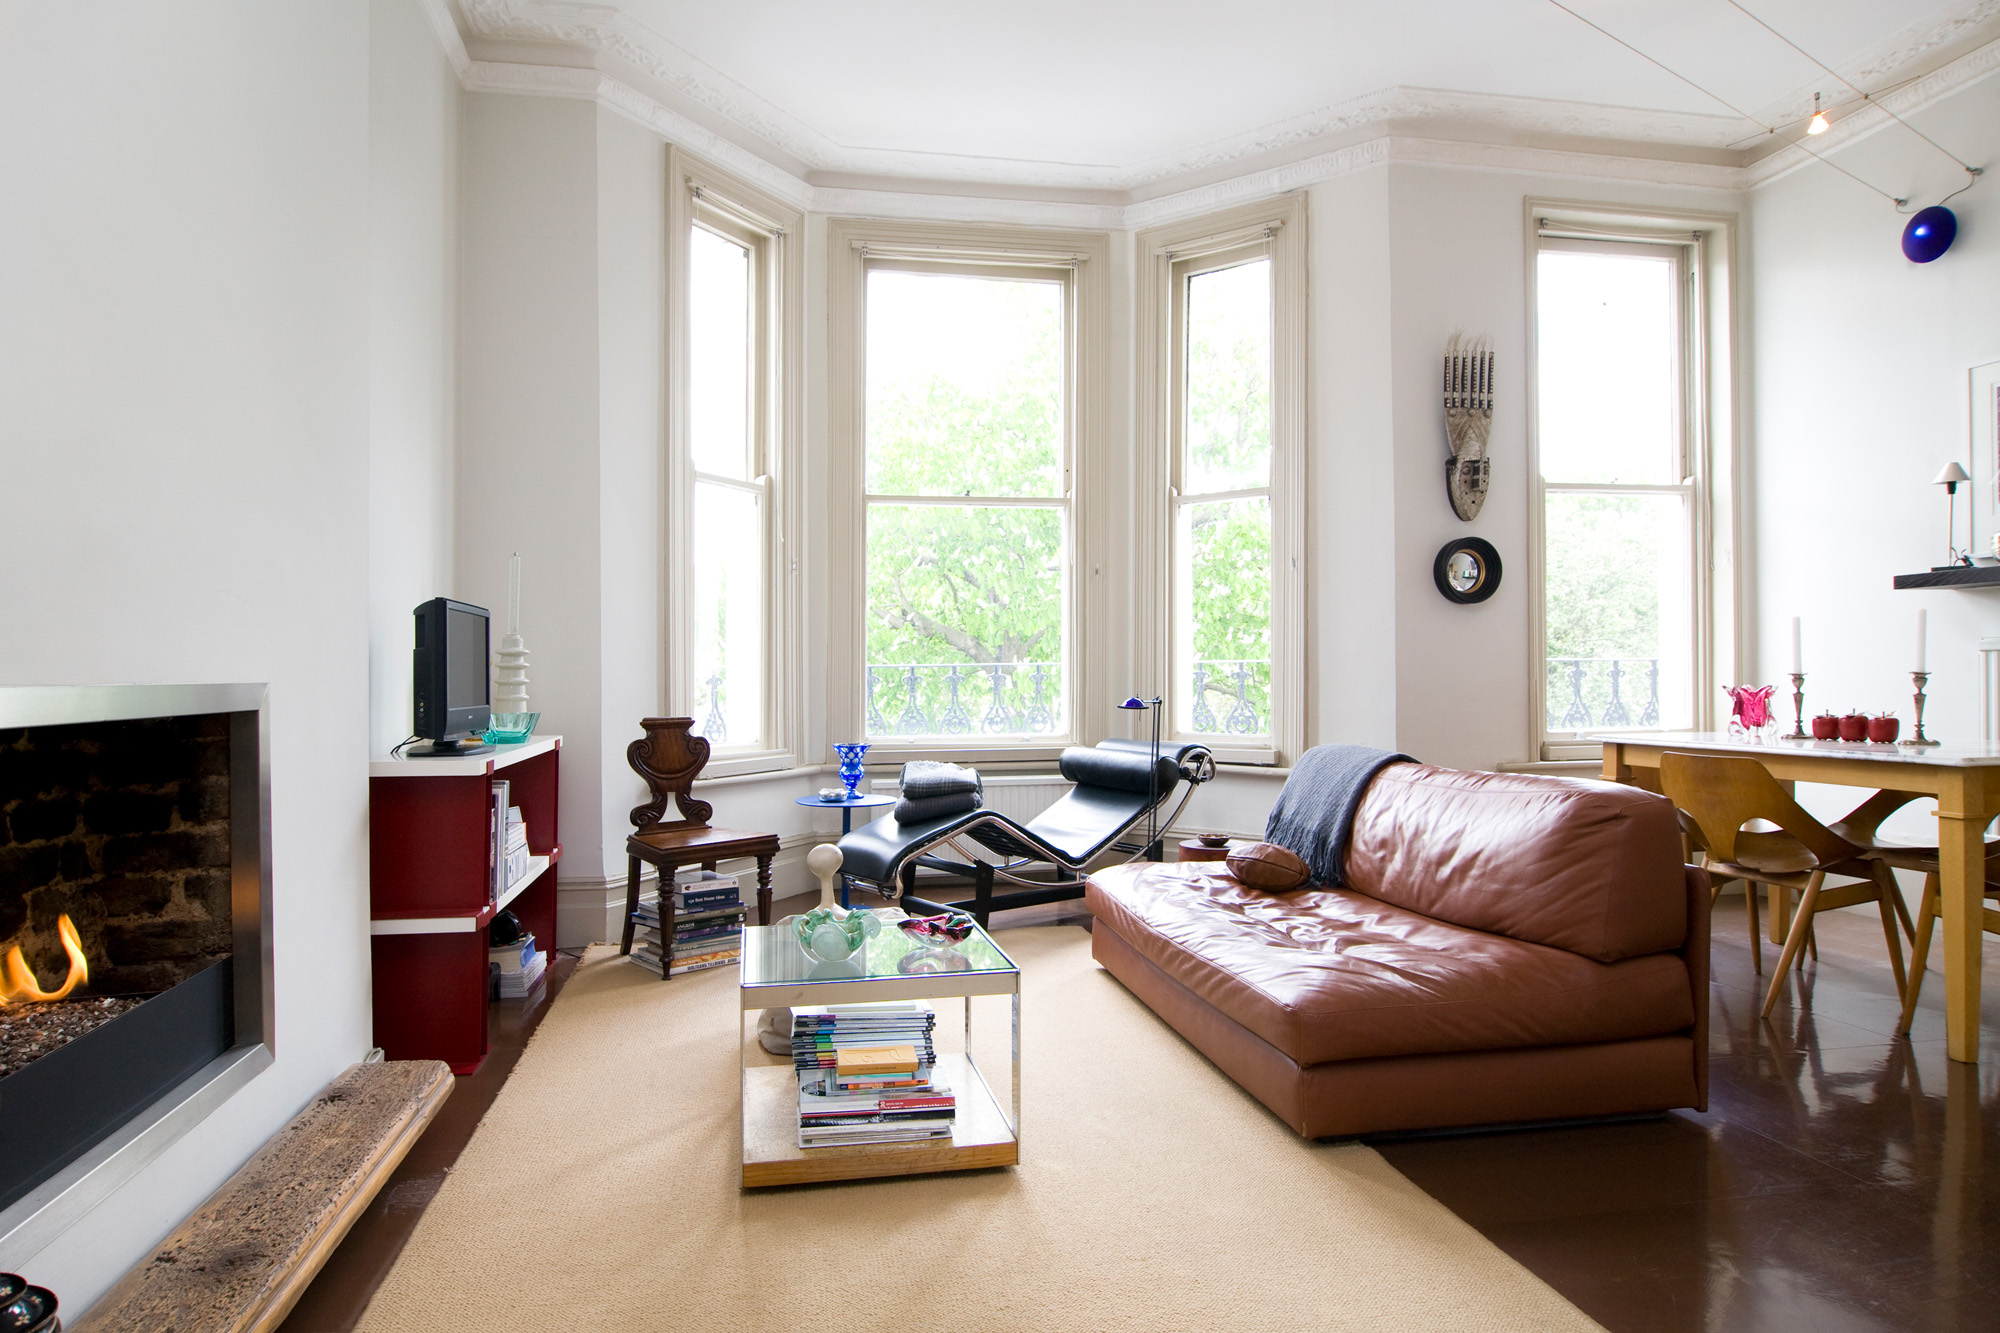 For Sale: St Jamess Gardens Notting Hill W11 contemporary reception room with bay windows